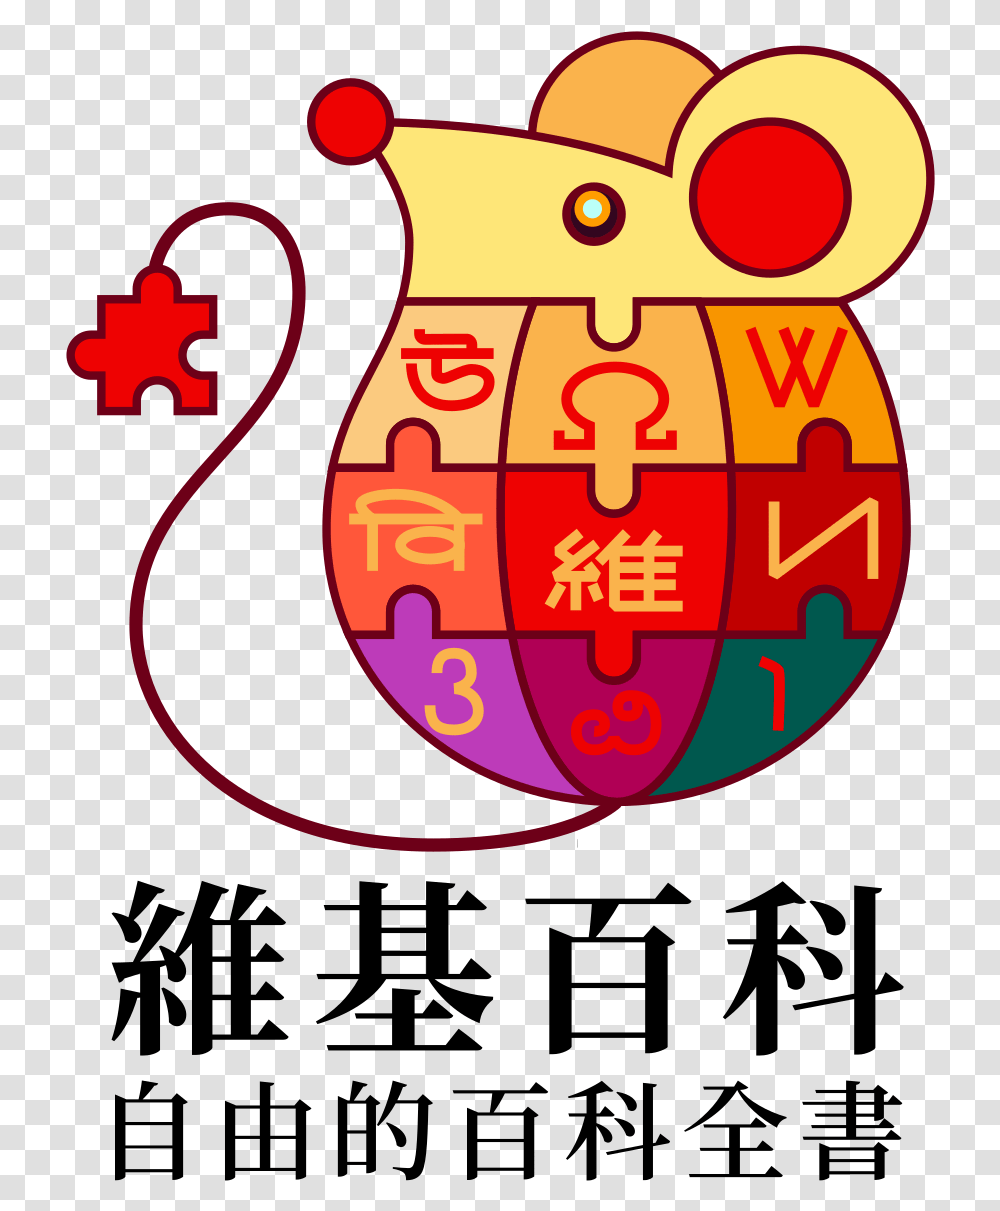 Filewikipedia Logov2zh2020 Chinese New Yeartcsvg Wikipedia Logo, Text, Number, Symbol, Trademark Transparent Png